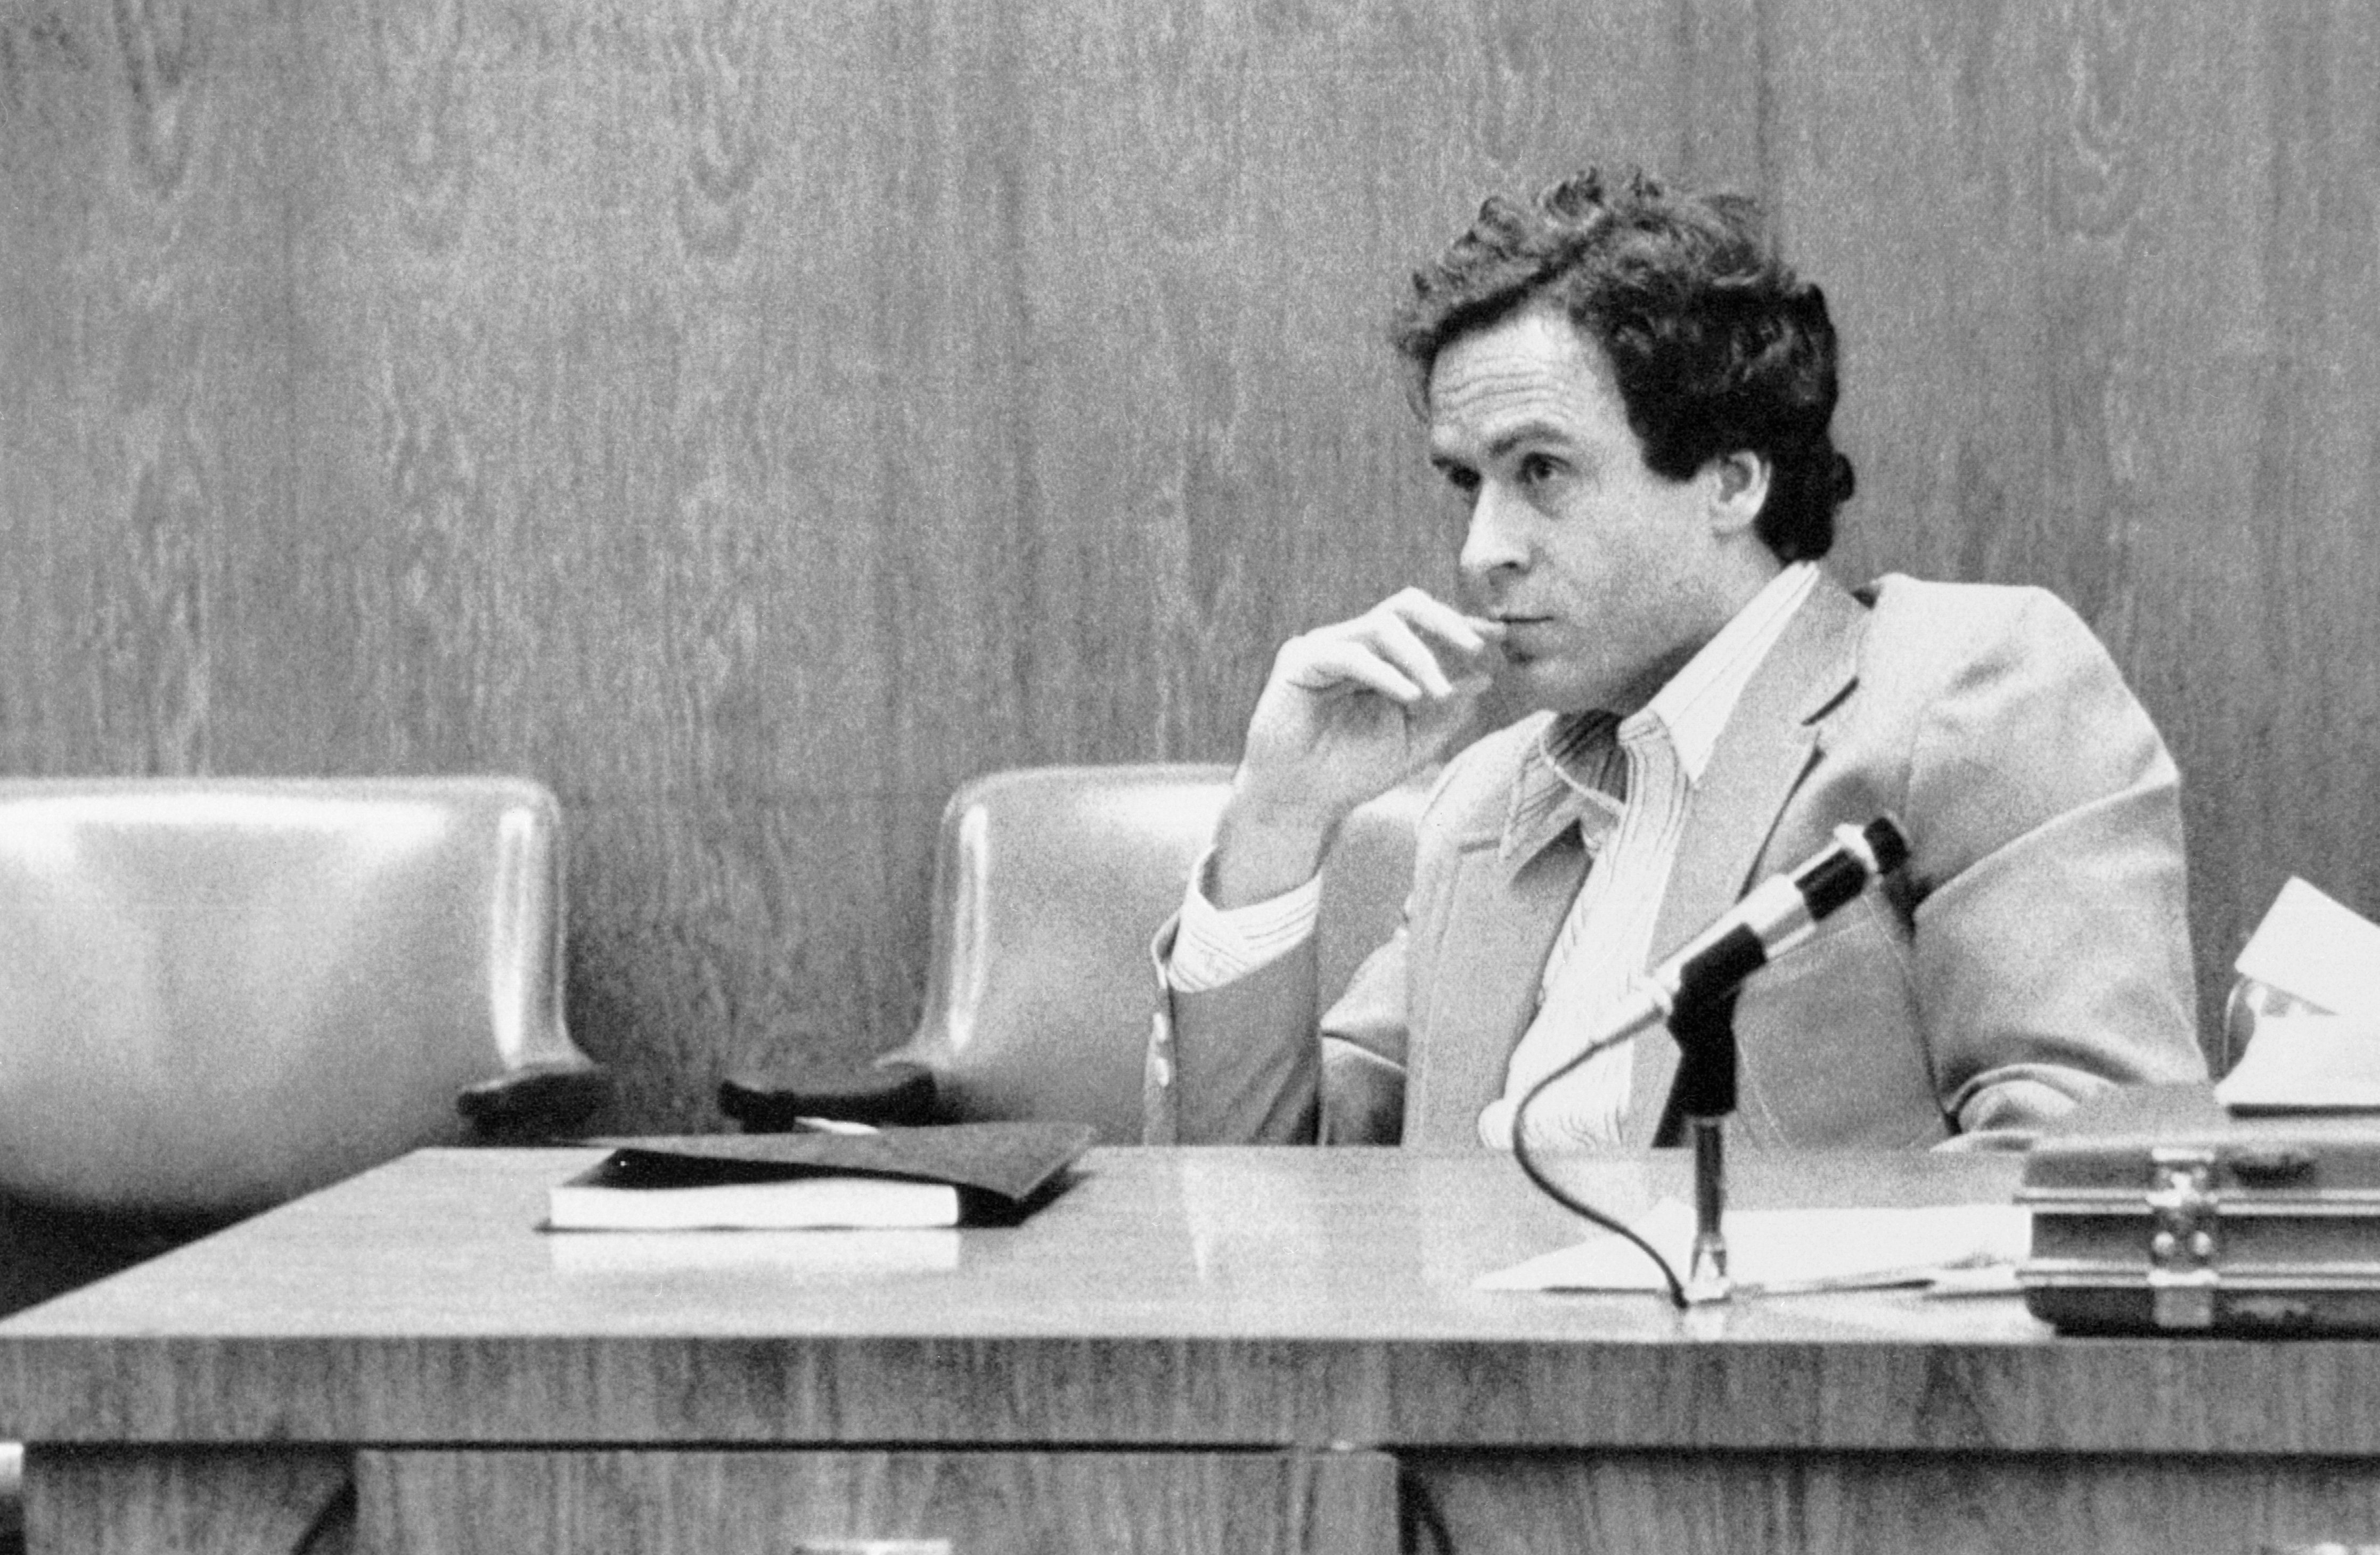 Ted Bundy in court in Orlando, Florida, circa January 1980 | Source: Getty Images